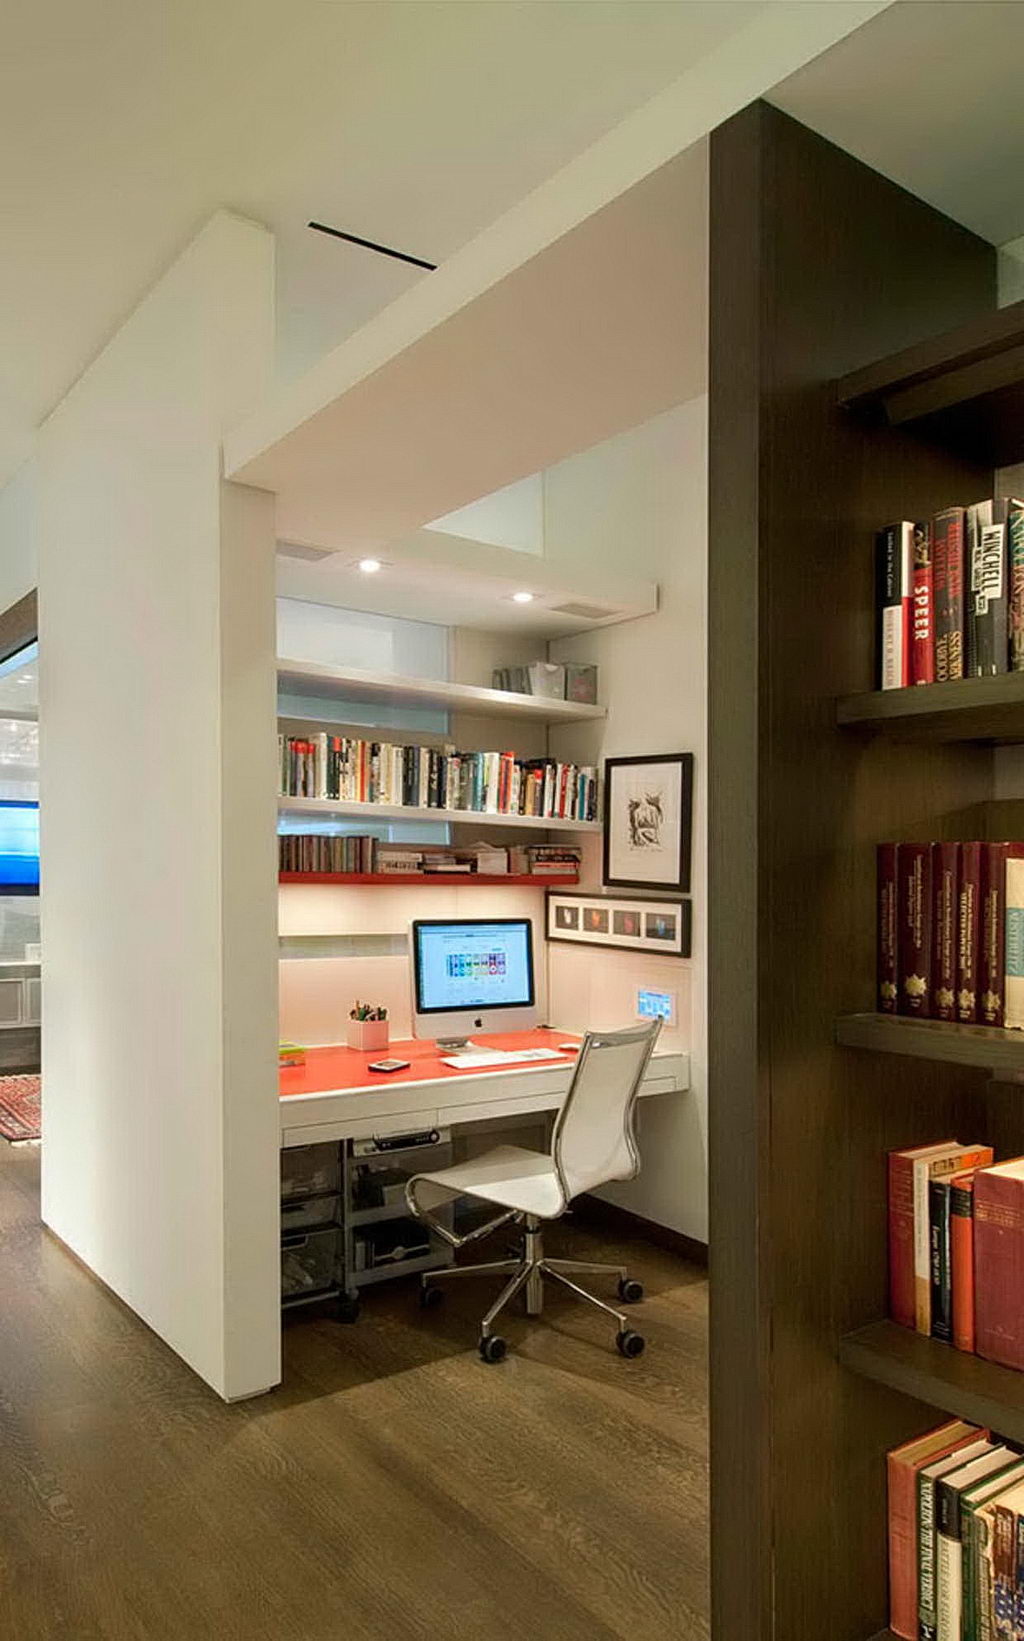 Home office as a part of living space